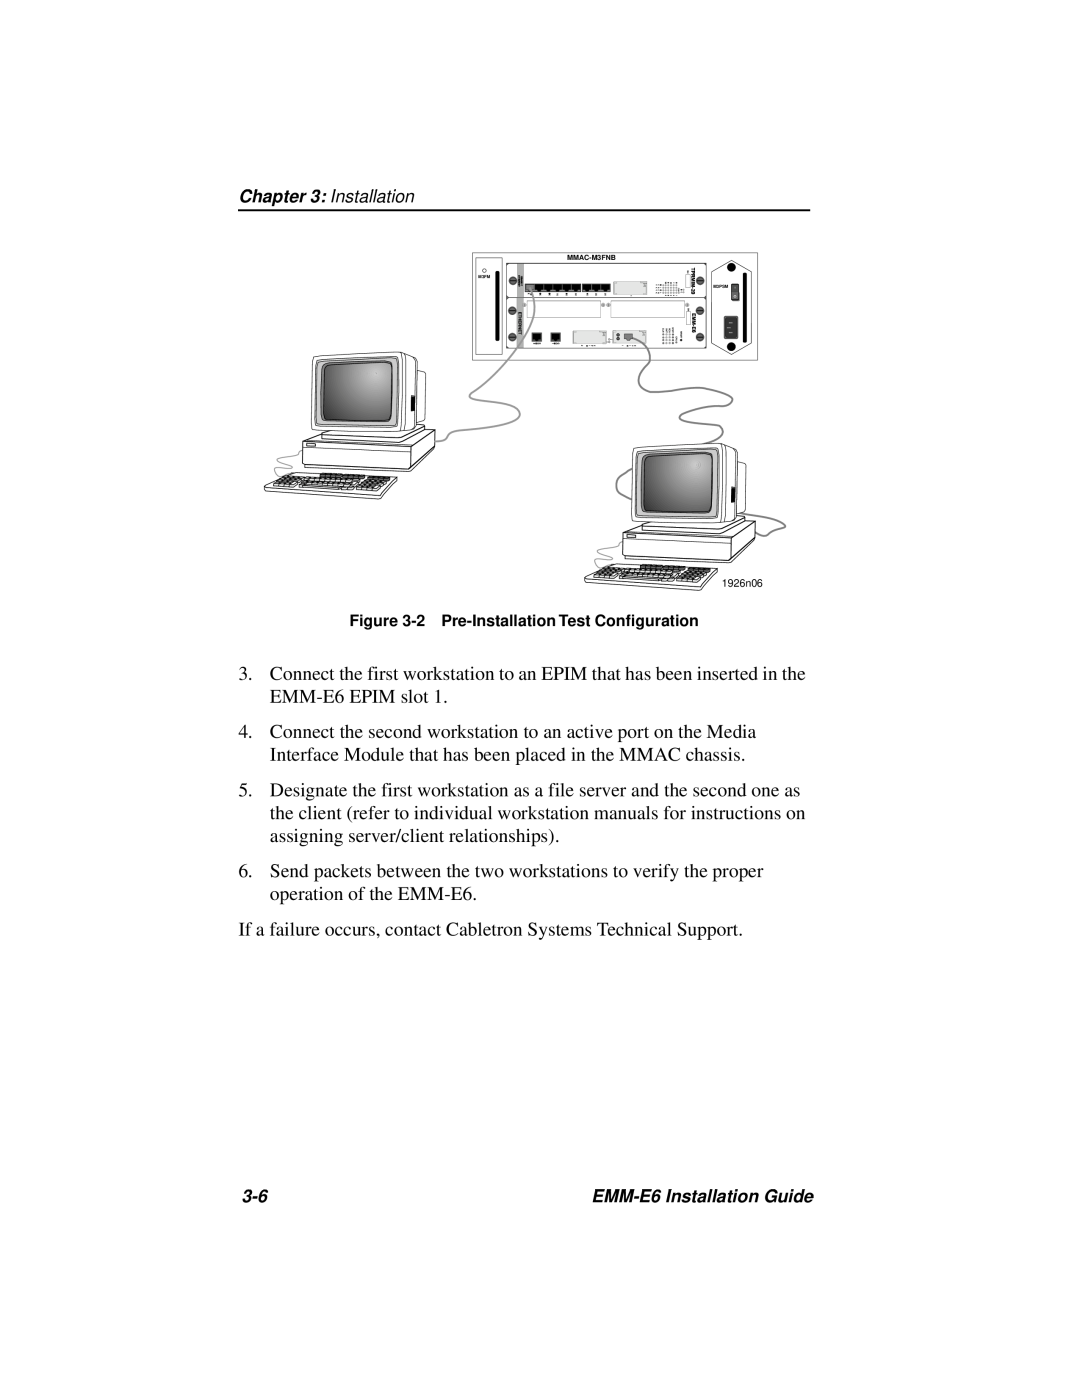 Cabletron Systems EMM-E6 manual If a failure occurs, contact Cabletron Systems Technical Support 